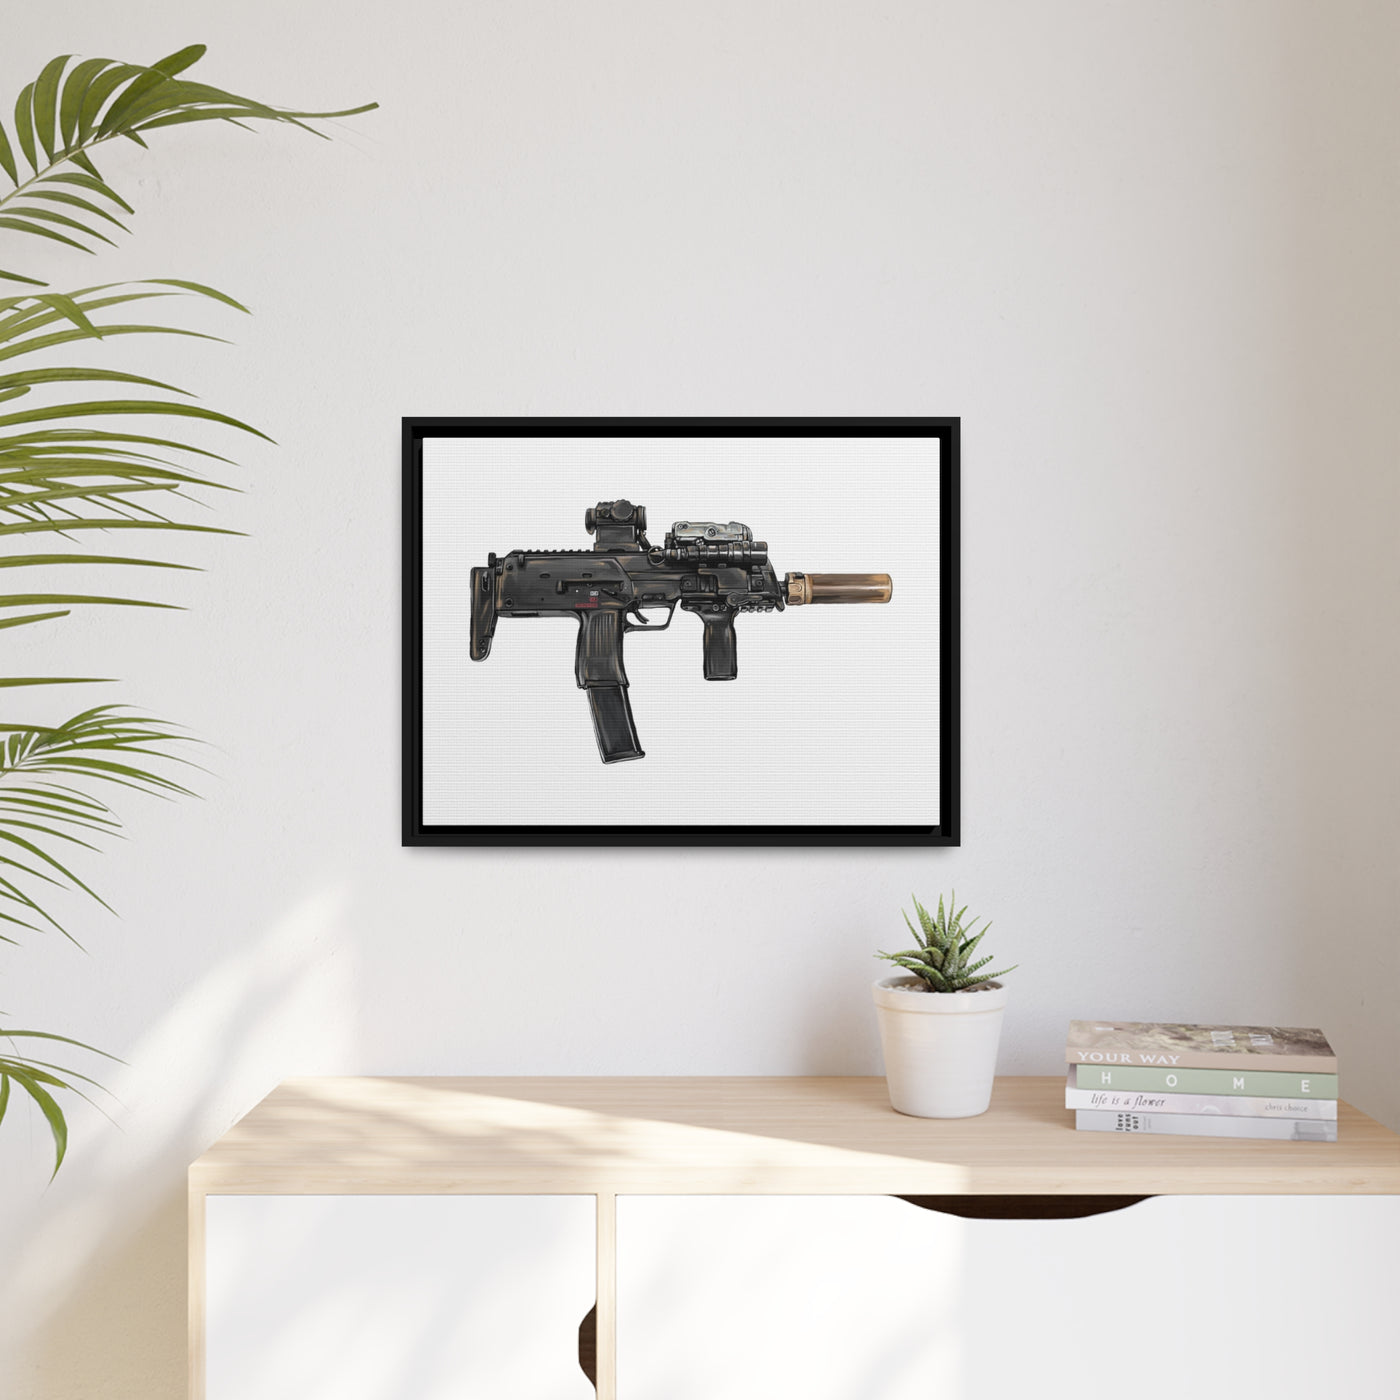 German 4.6x30mm Sub Machine Gun Painting - Just The Piece - Black Framed Wrapped Canvas - Value Collection